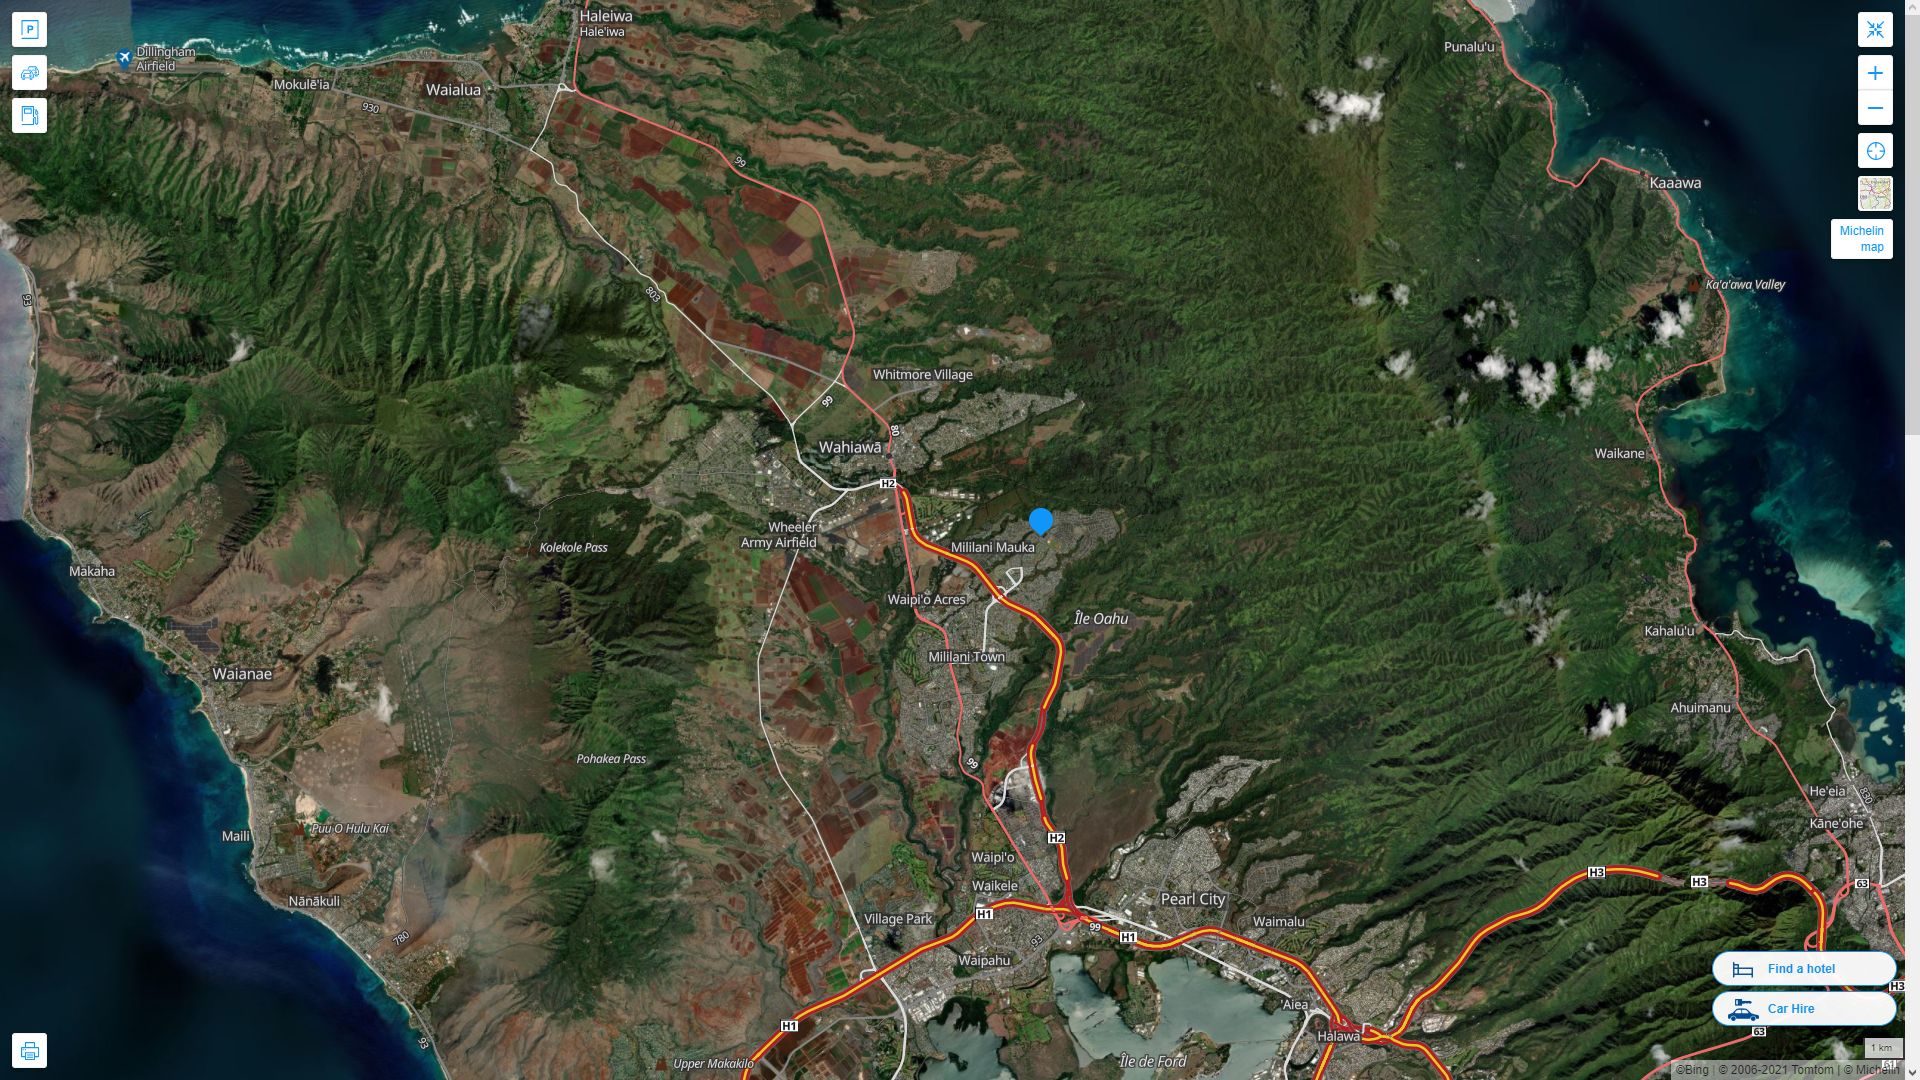 Mililani Mauka Hawaii Highway and Road Map with Satellite View